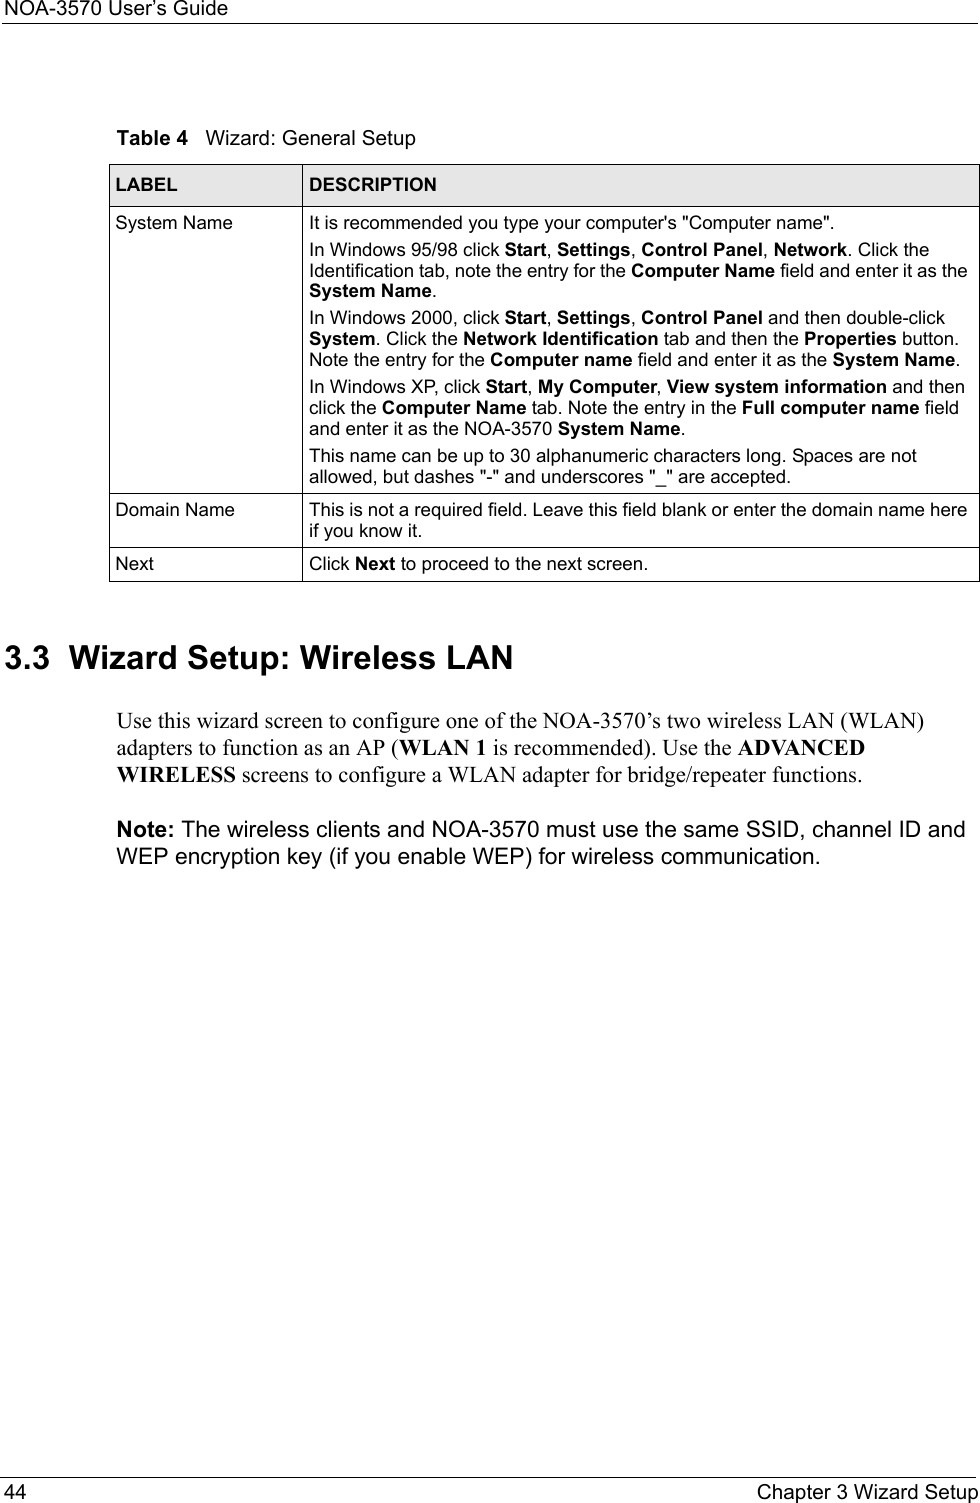 NOA-3570 User’s Guide44 Chapter 3 Wizard Setup3.3  Wizard Setup: Wireless LANUse this wizard screen to configure one of the NOA-3570’s two wireless LAN (WLAN) adapters to function as an AP (WLAN 1 is recommended). Use the ADVANCED WIRELESS screens to configure a WLAN adapter for bridge/repeater functions.Note: The wireless clients and NOA-3570 must use the same SSID, channel ID and WEP encryption key (if you enable WEP) for wireless communication.Table 4   Wizard: General SetupLABEL DESCRIPTIONSystem Name It is recommended you type your computer&apos;s &quot;Computer name&quot;. In Windows 95/98 click Start, Settings, Control Panel, Network. Click the Identification tab, note the entry for the Computer Name field and enter it as the System Name.In Windows 2000, click Start, Settings, Control Panel and then double-click System. Click the Network Identification tab and then the Properties button. Note the entry for the Computer name field and enter it as the System Name.In Windows XP, click Start, My Computer, View system information and then click the Computer Name tab. Note the entry in the Full computer name field and enter it as the NOA-3570 System Name.This name can be up to 30 alphanumeric characters long. Spaces are not allowed, but dashes &quot;-&quot; and underscores &quot;_&quot; are accepted.Domain Name This is not a required field. Leave this field blank or enter the domain name here if you know it.Next Click Next to proceed to the next screen. 